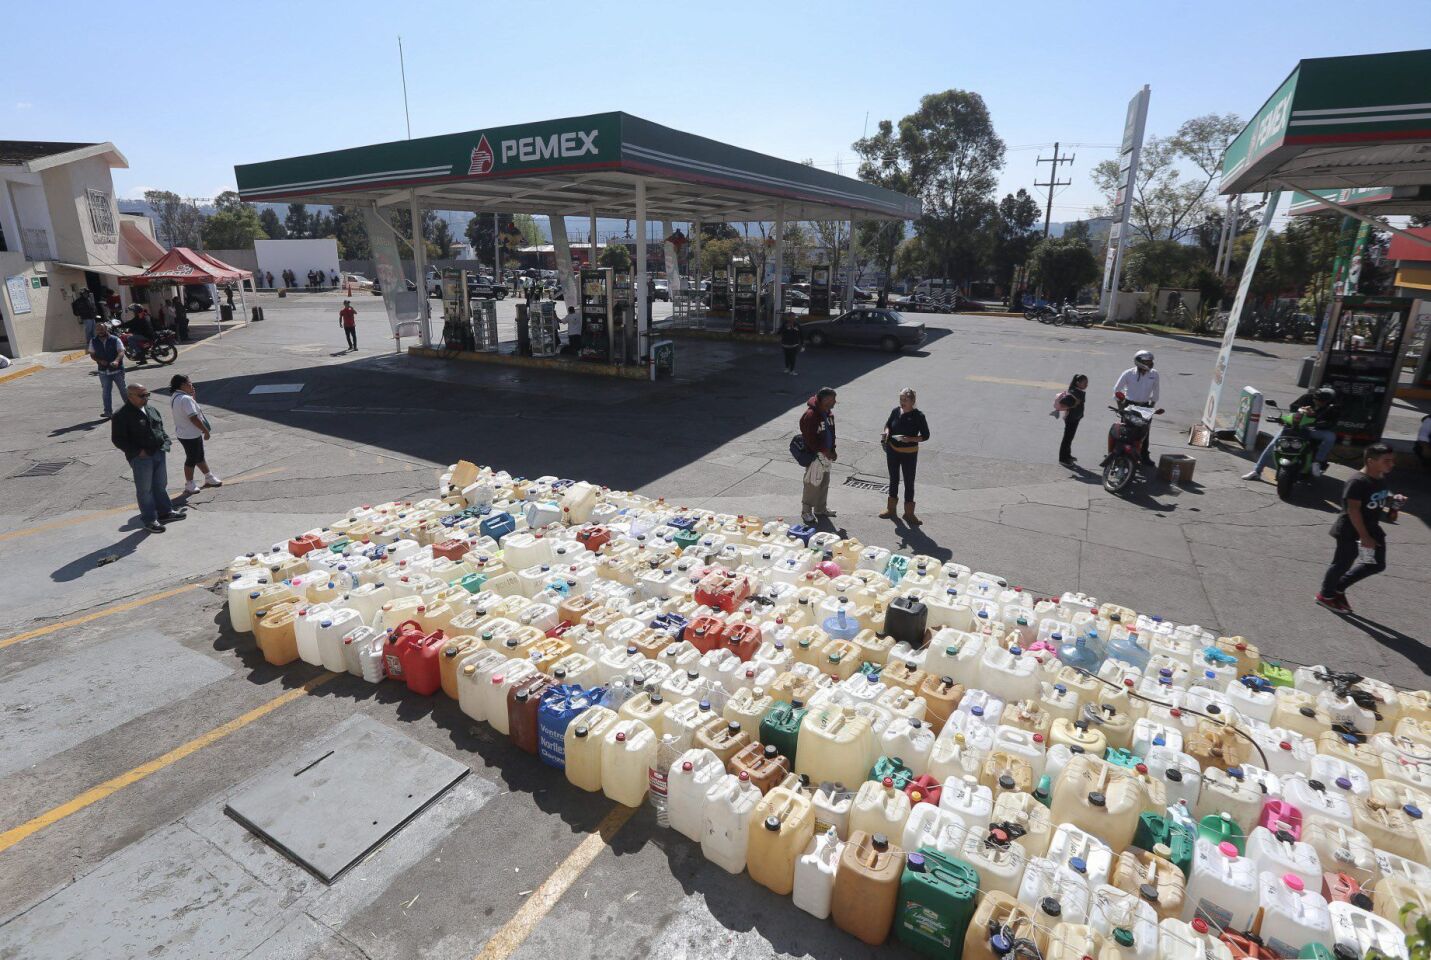 Gas shortages in Mexico